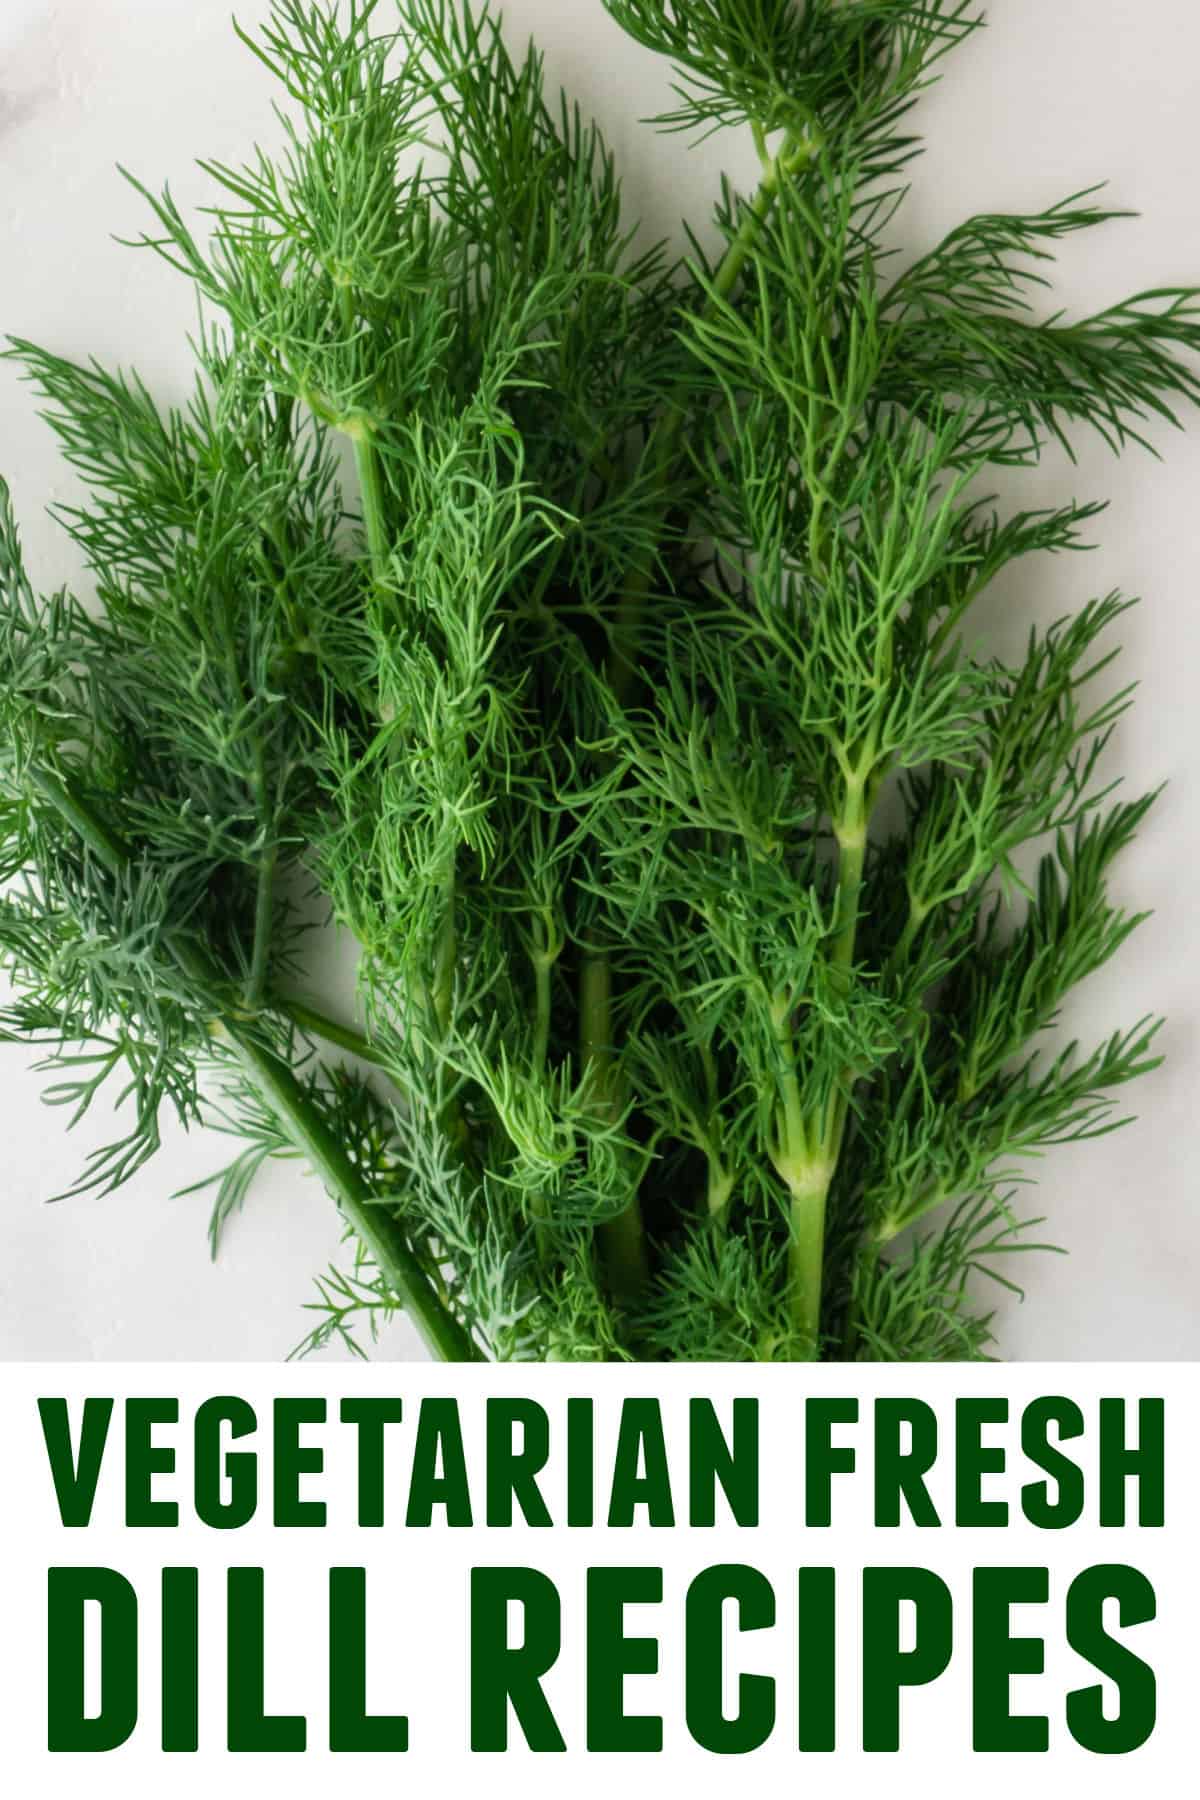 A photo of fresh dill with text underneath that reads, "vegetarian fresh dill recipes."